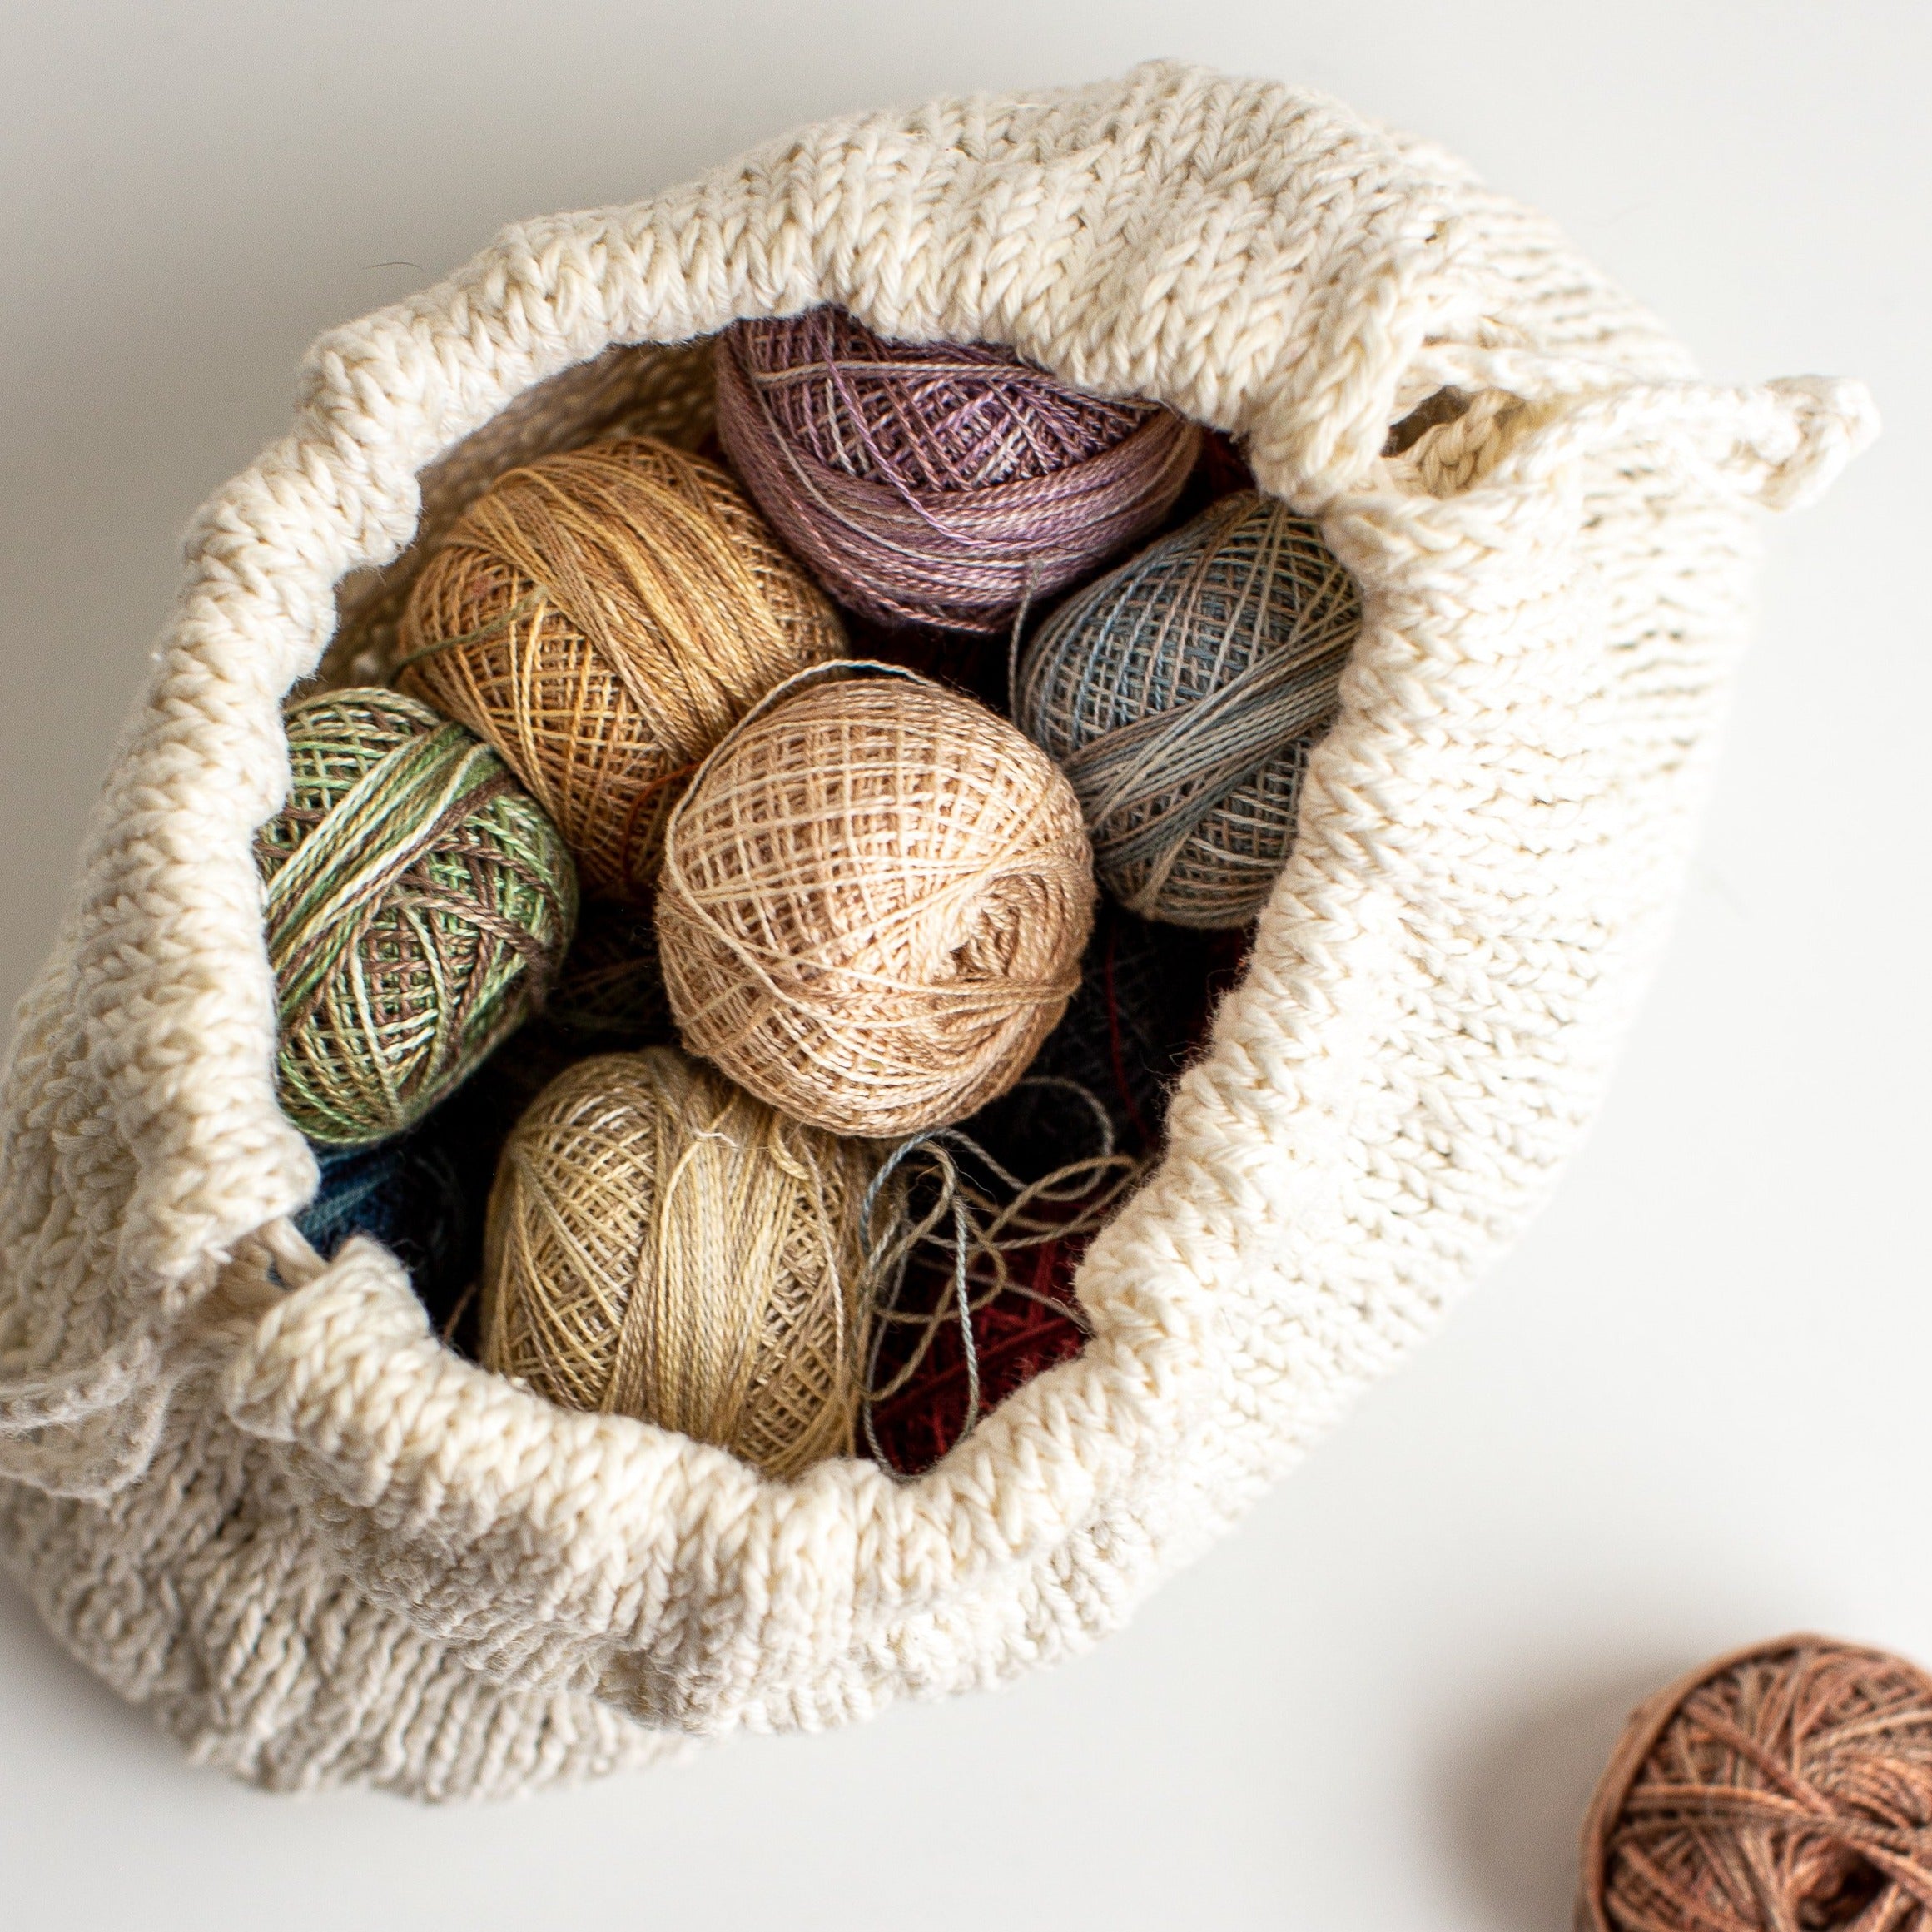 Knitting Basket with Lid